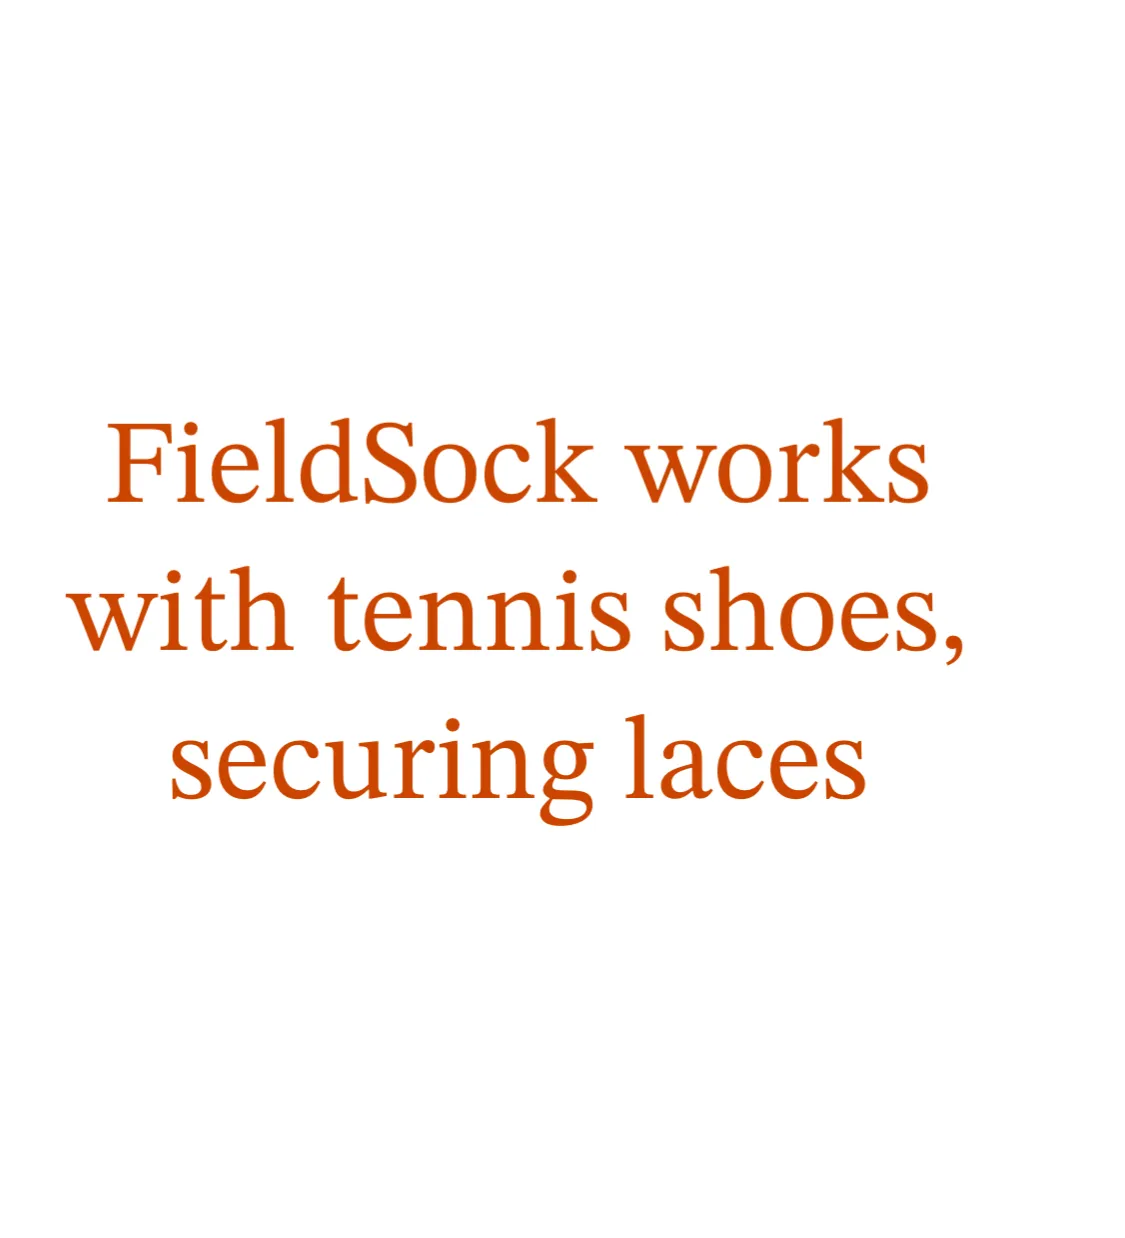 fieldsock works with tennishoes